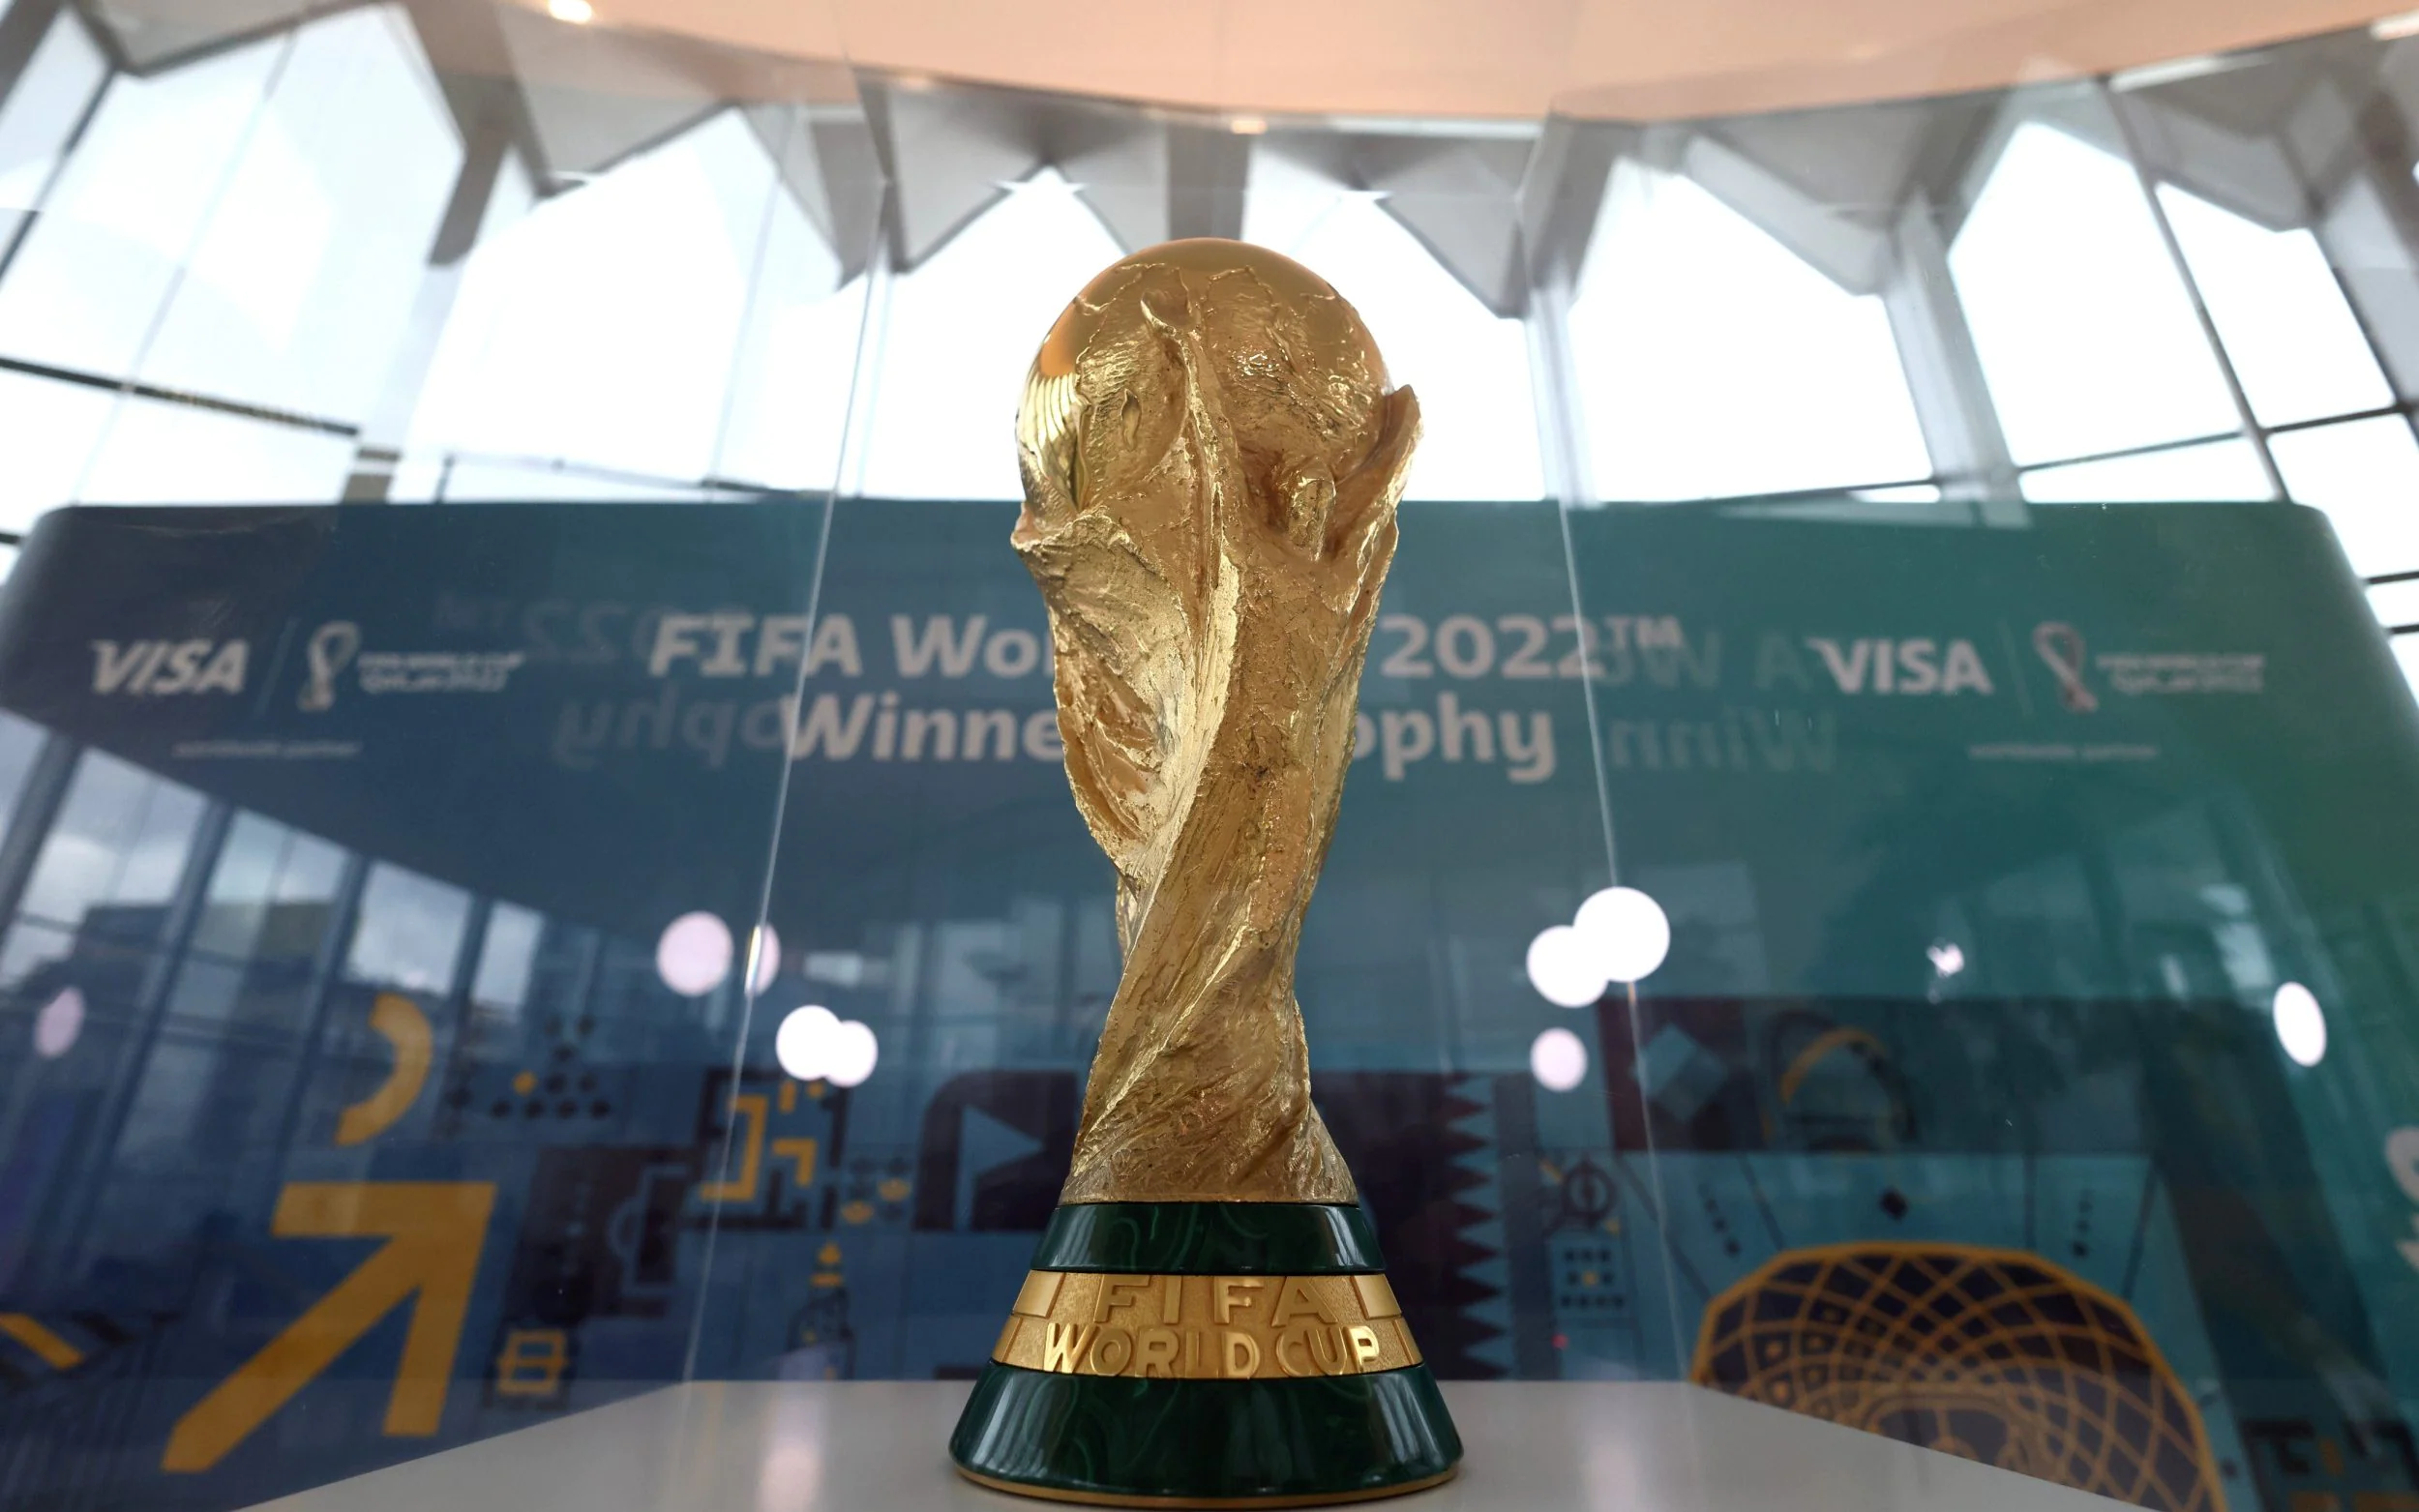 FIFA World Cup Qatar 2022: Finals Draw will take place on April 1